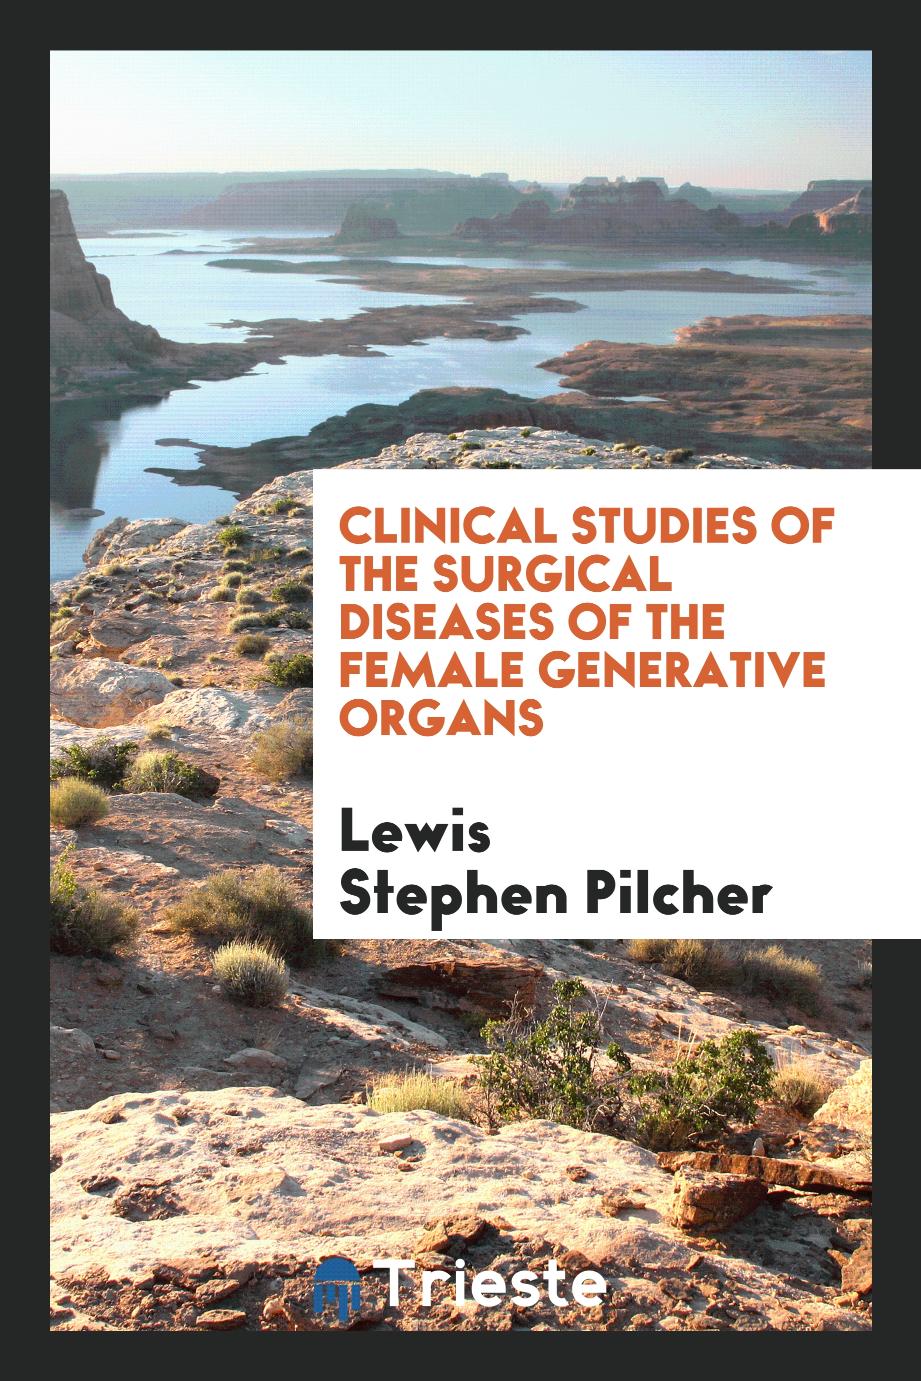 Clinical Studies of the Surgical Diseases of the Female Generative Organs